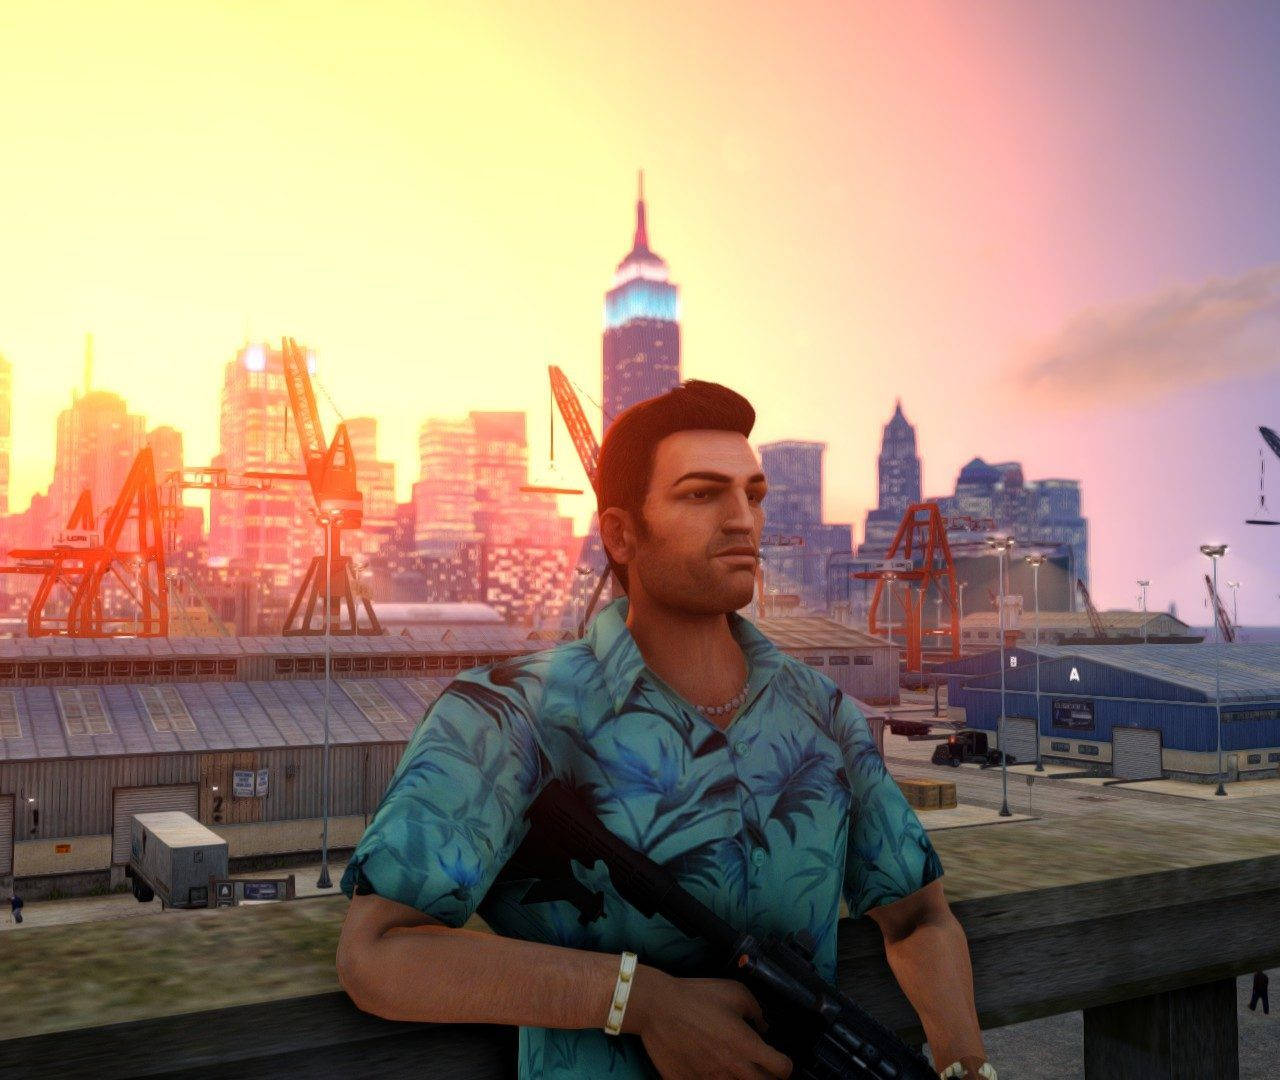 Gta Vice City Main Protagonist Tommy Wallpaper